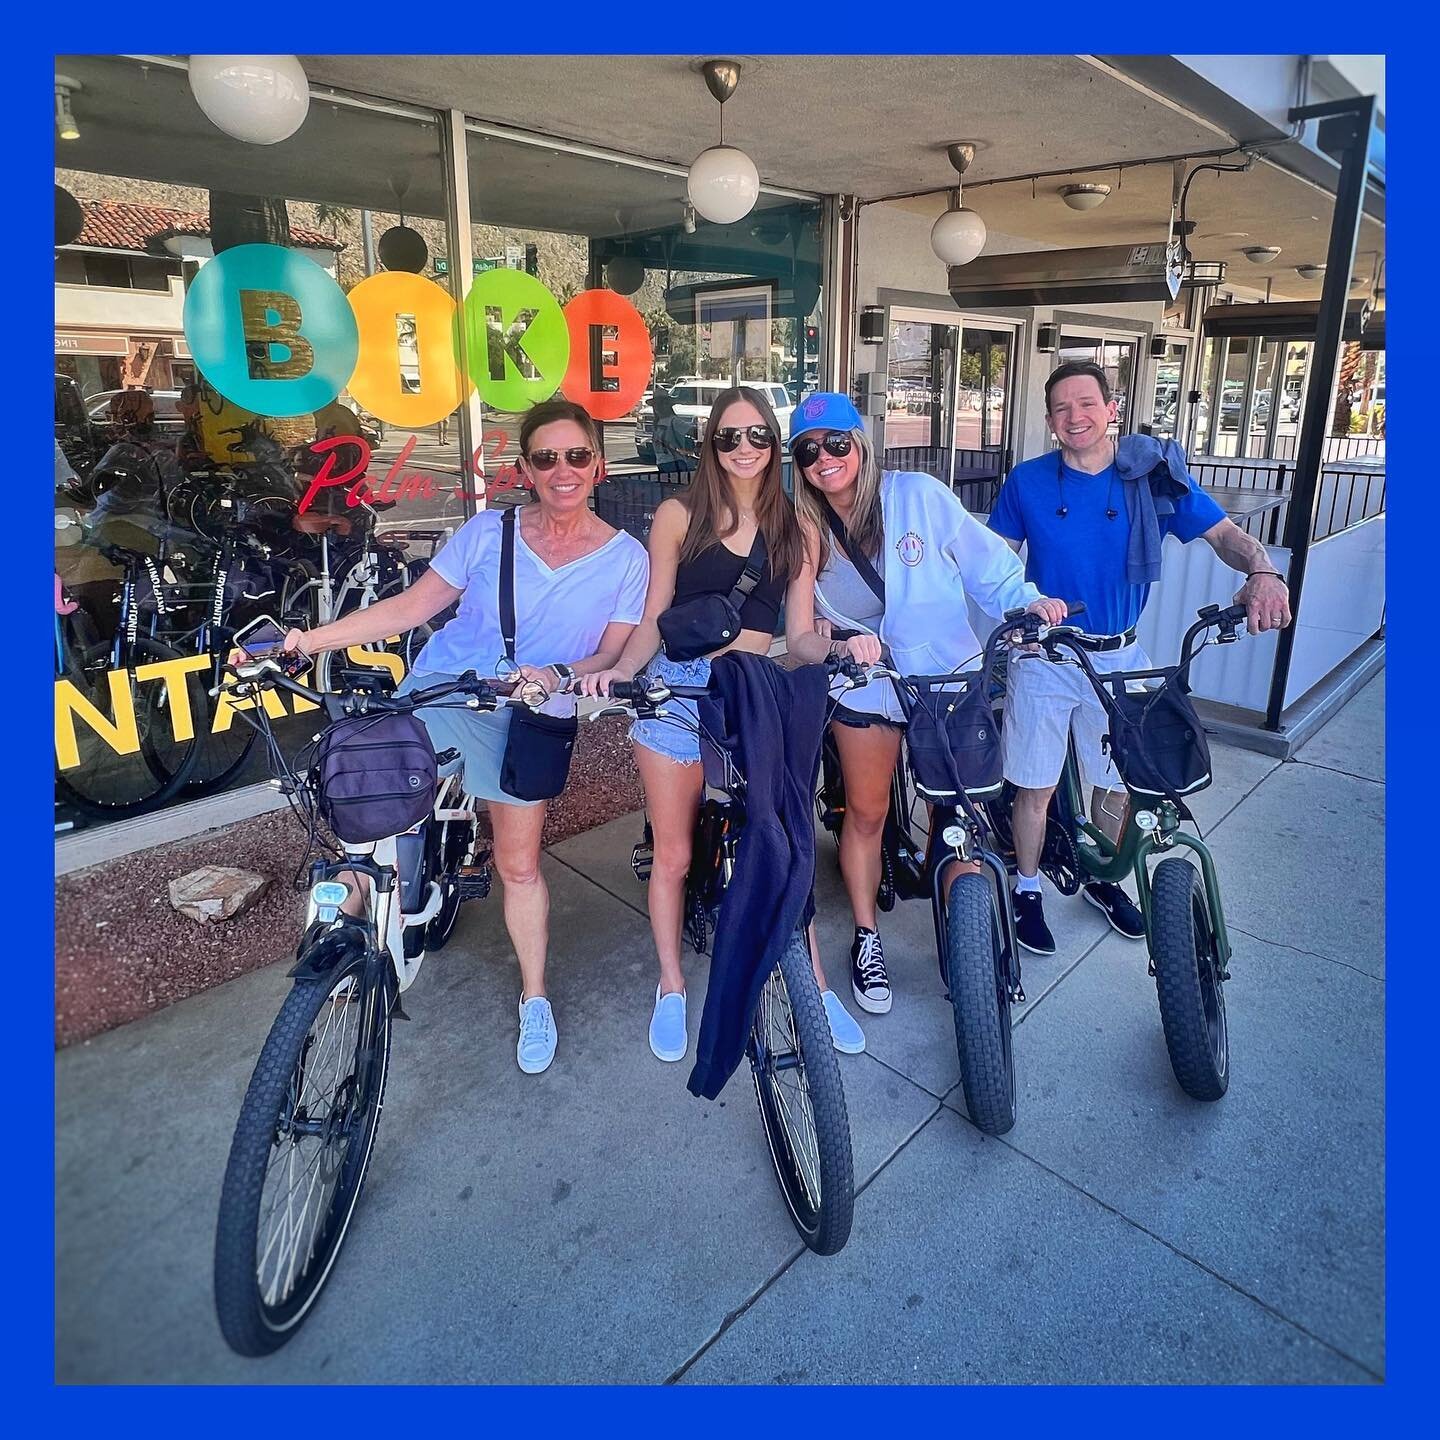 🌴 ☀️ 💙 🚲 🌵 
We hope you had a great time! So grateful for guests like you!
.
.
.
.
.
#visitgps #palmspringsca #BikepalmspringsOnTahquitz
#palmsprings #localsupport #bikerental
#newlocation #secondlocation #growth
#bikeride #cityofpalmsprings #bic